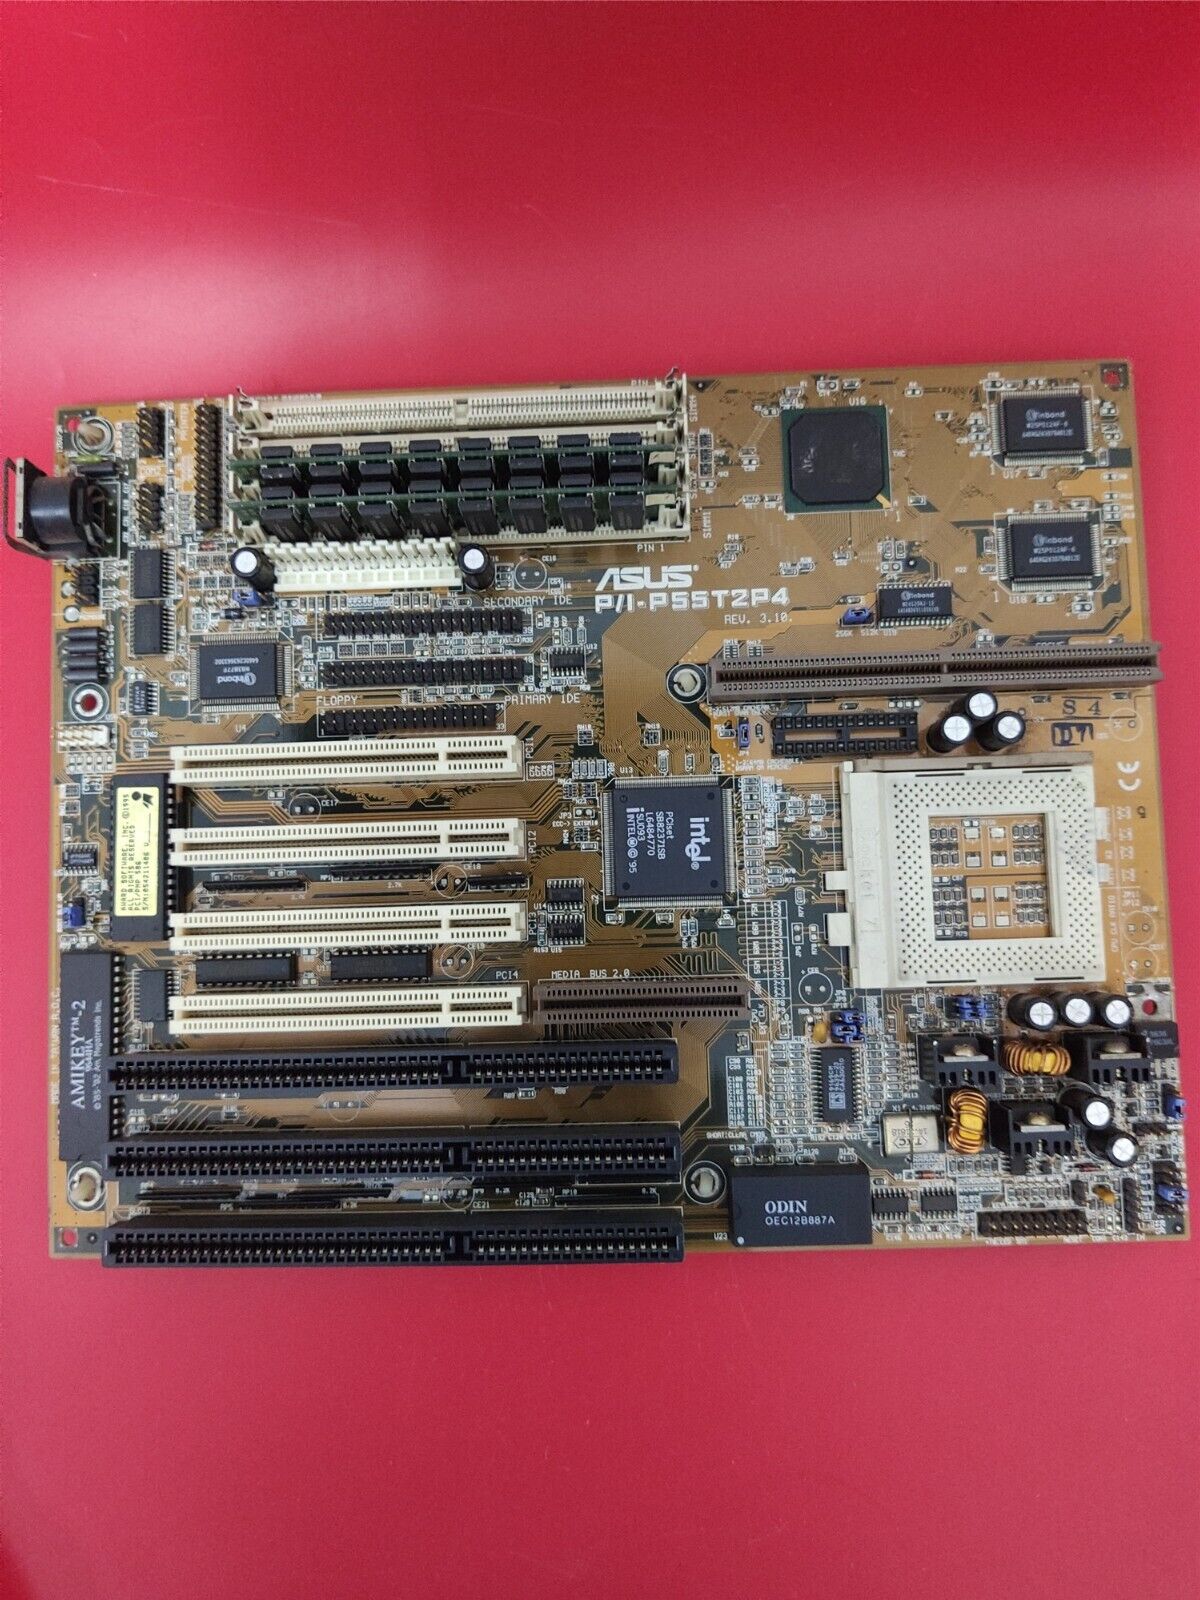 1 pc Used Asus 586 motherboard P/I-P55T2P4